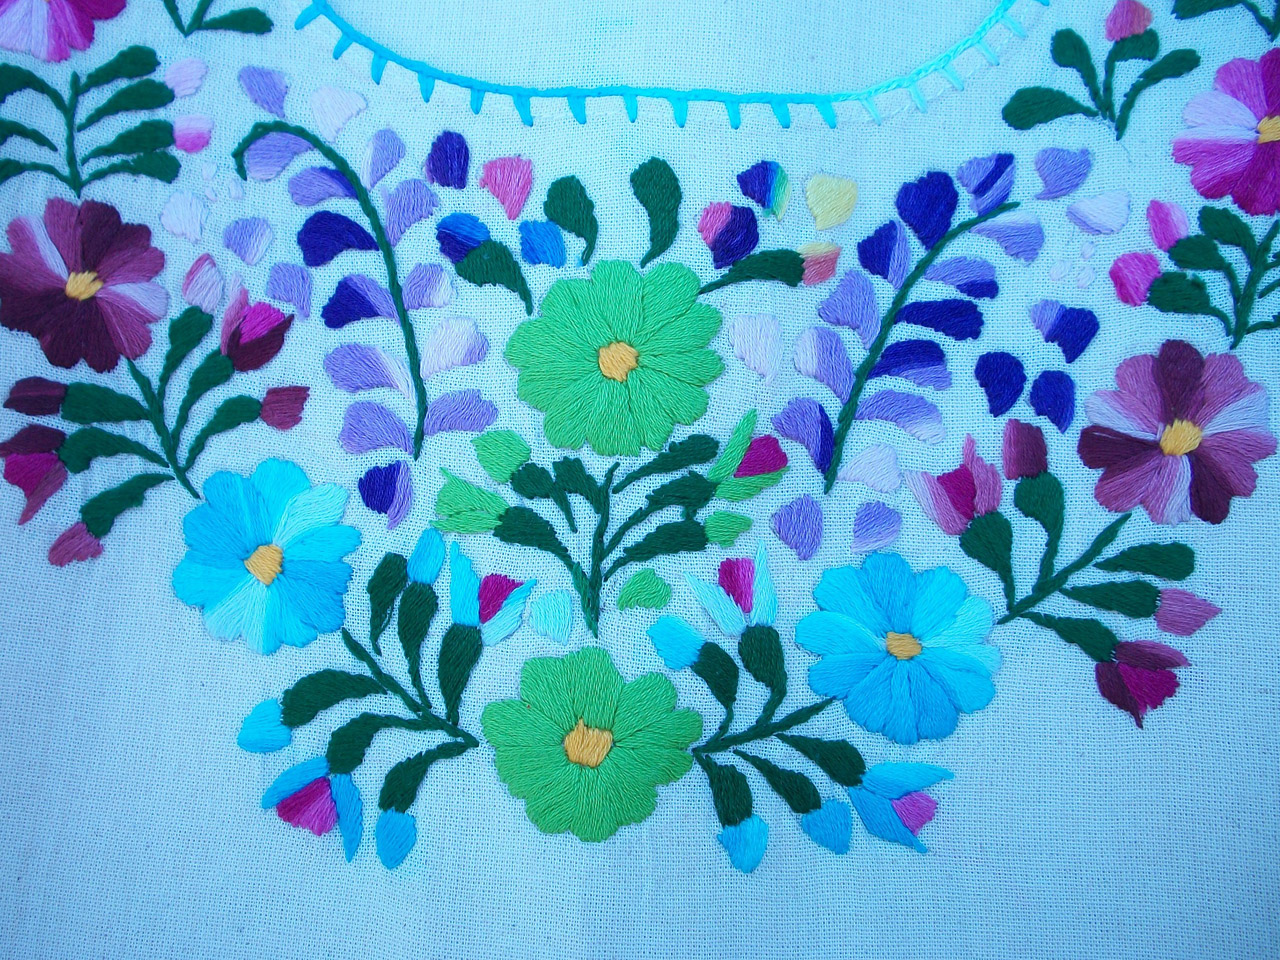 embroidery flowers crafts free photo